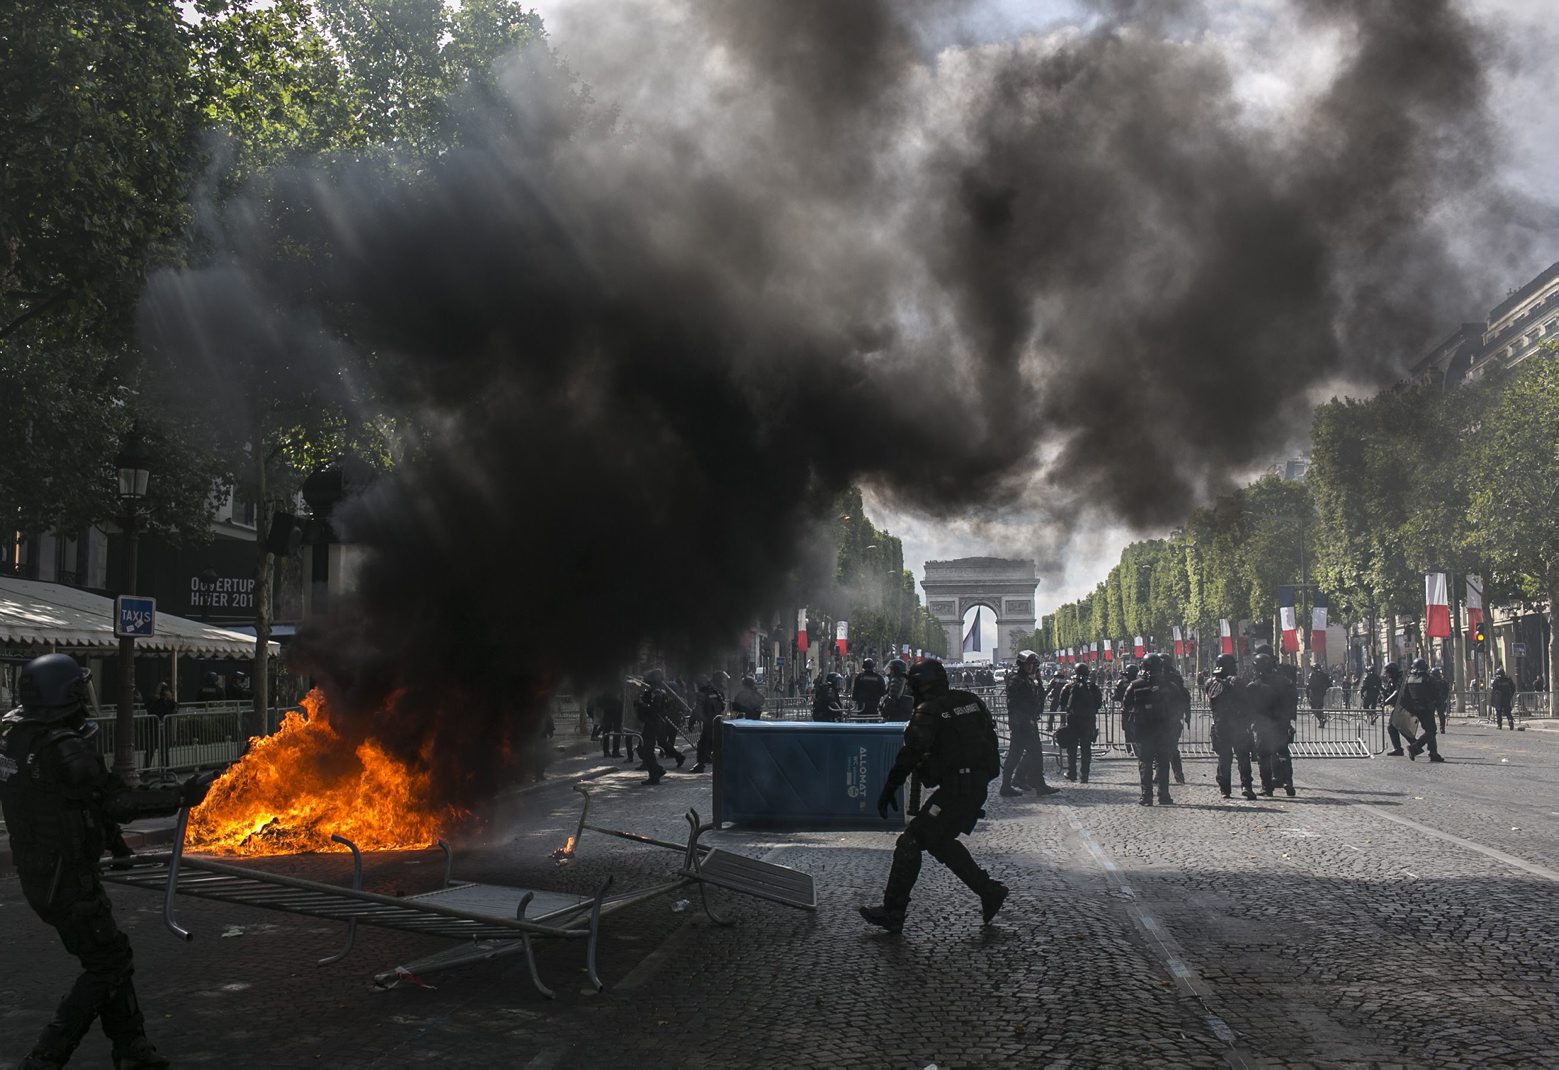 Riot police officers take position on the Champs-Elysees avenue during scuffles with demonstrators after Bastille Day parade Sunday, July 14, 2019 in Paris. (AP Photo/Rafael Yaghobzadeh) APTOPIX France Bastille Day